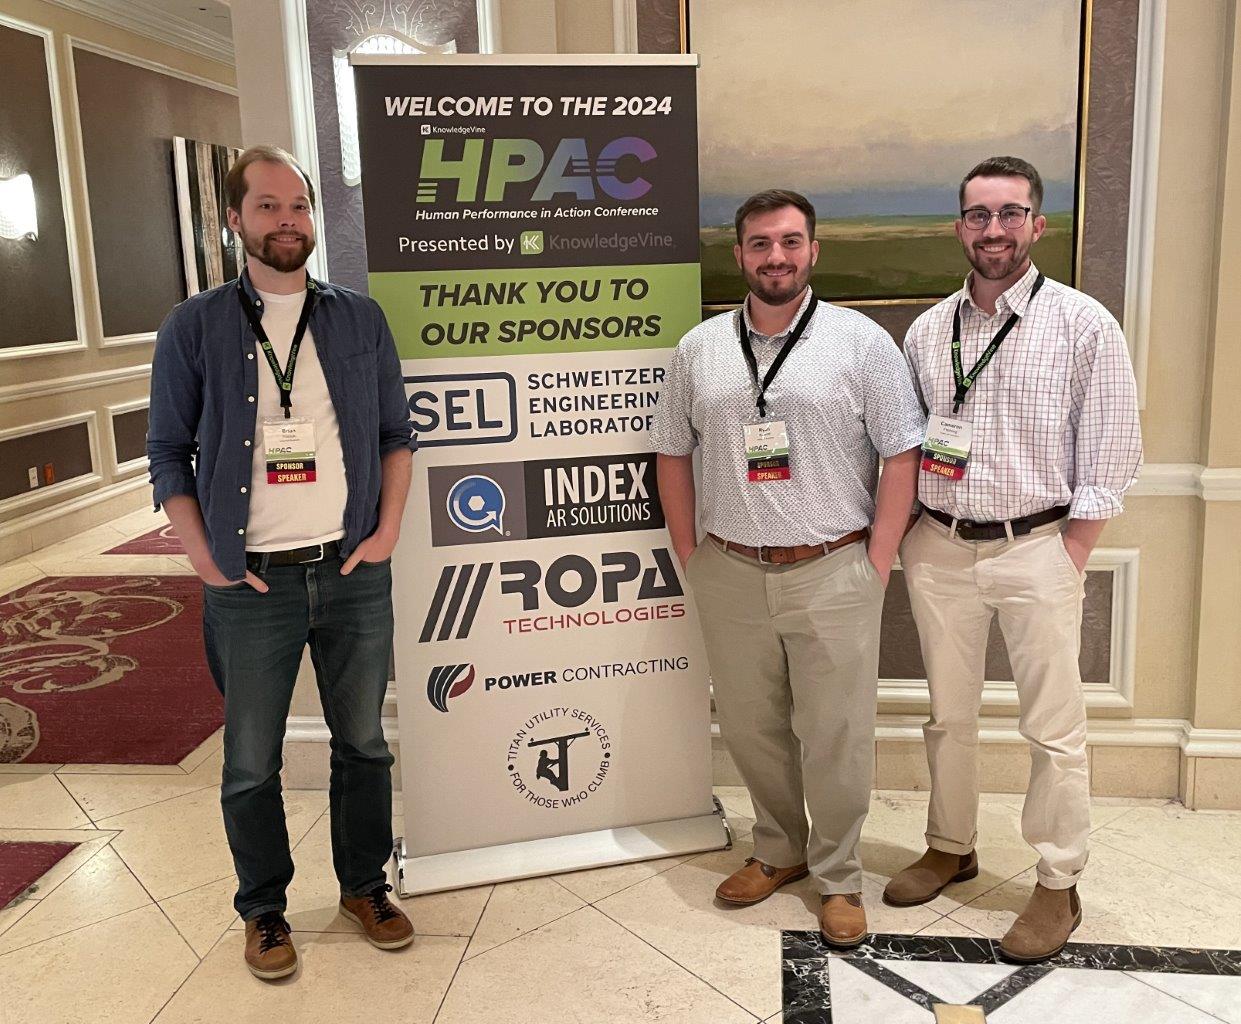 Index AR Solutions team at HPAC 2024 conference